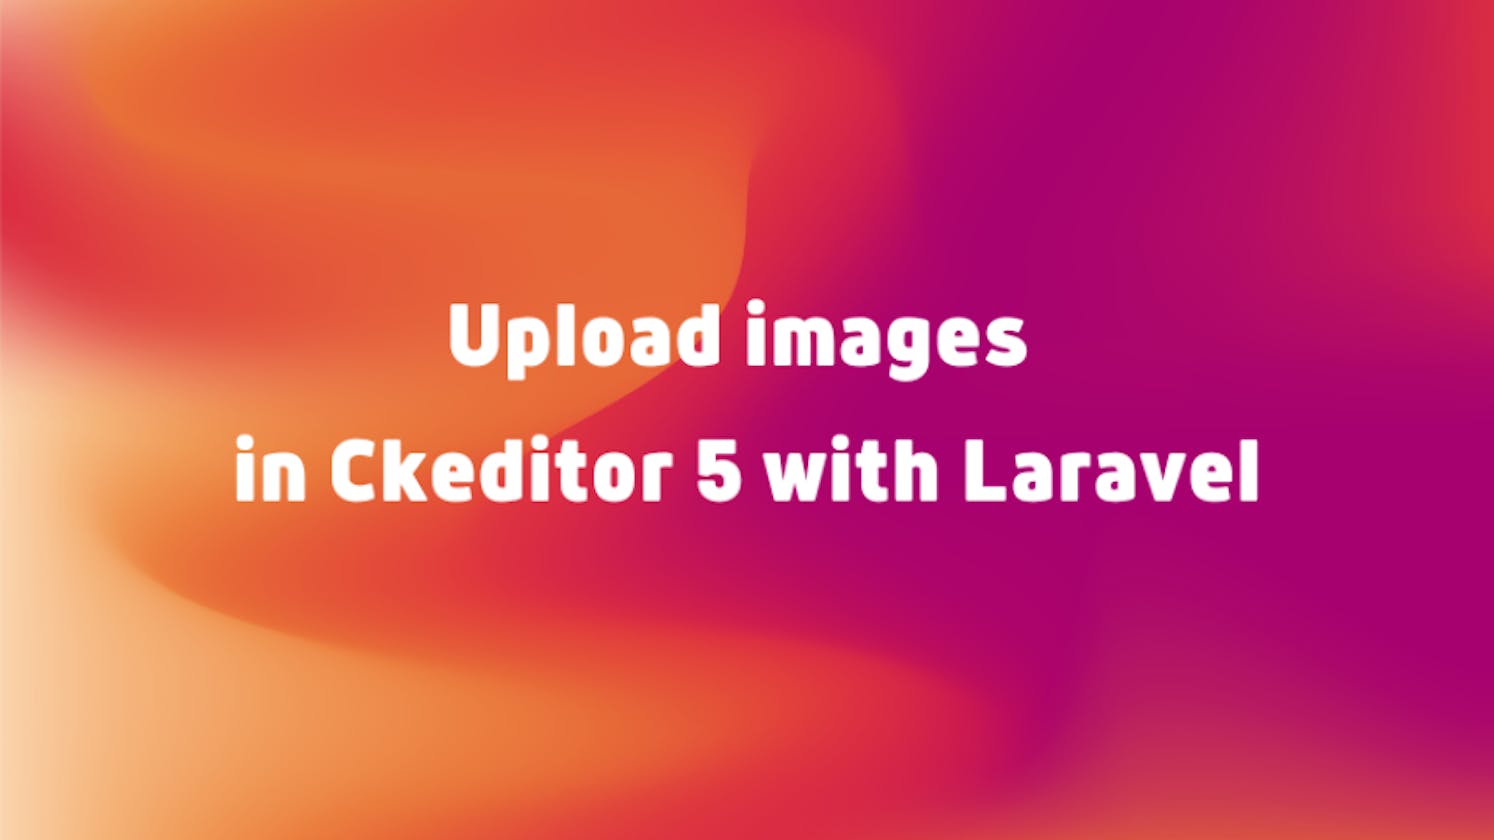 Upload images in Ckeditor 5 with Laravel